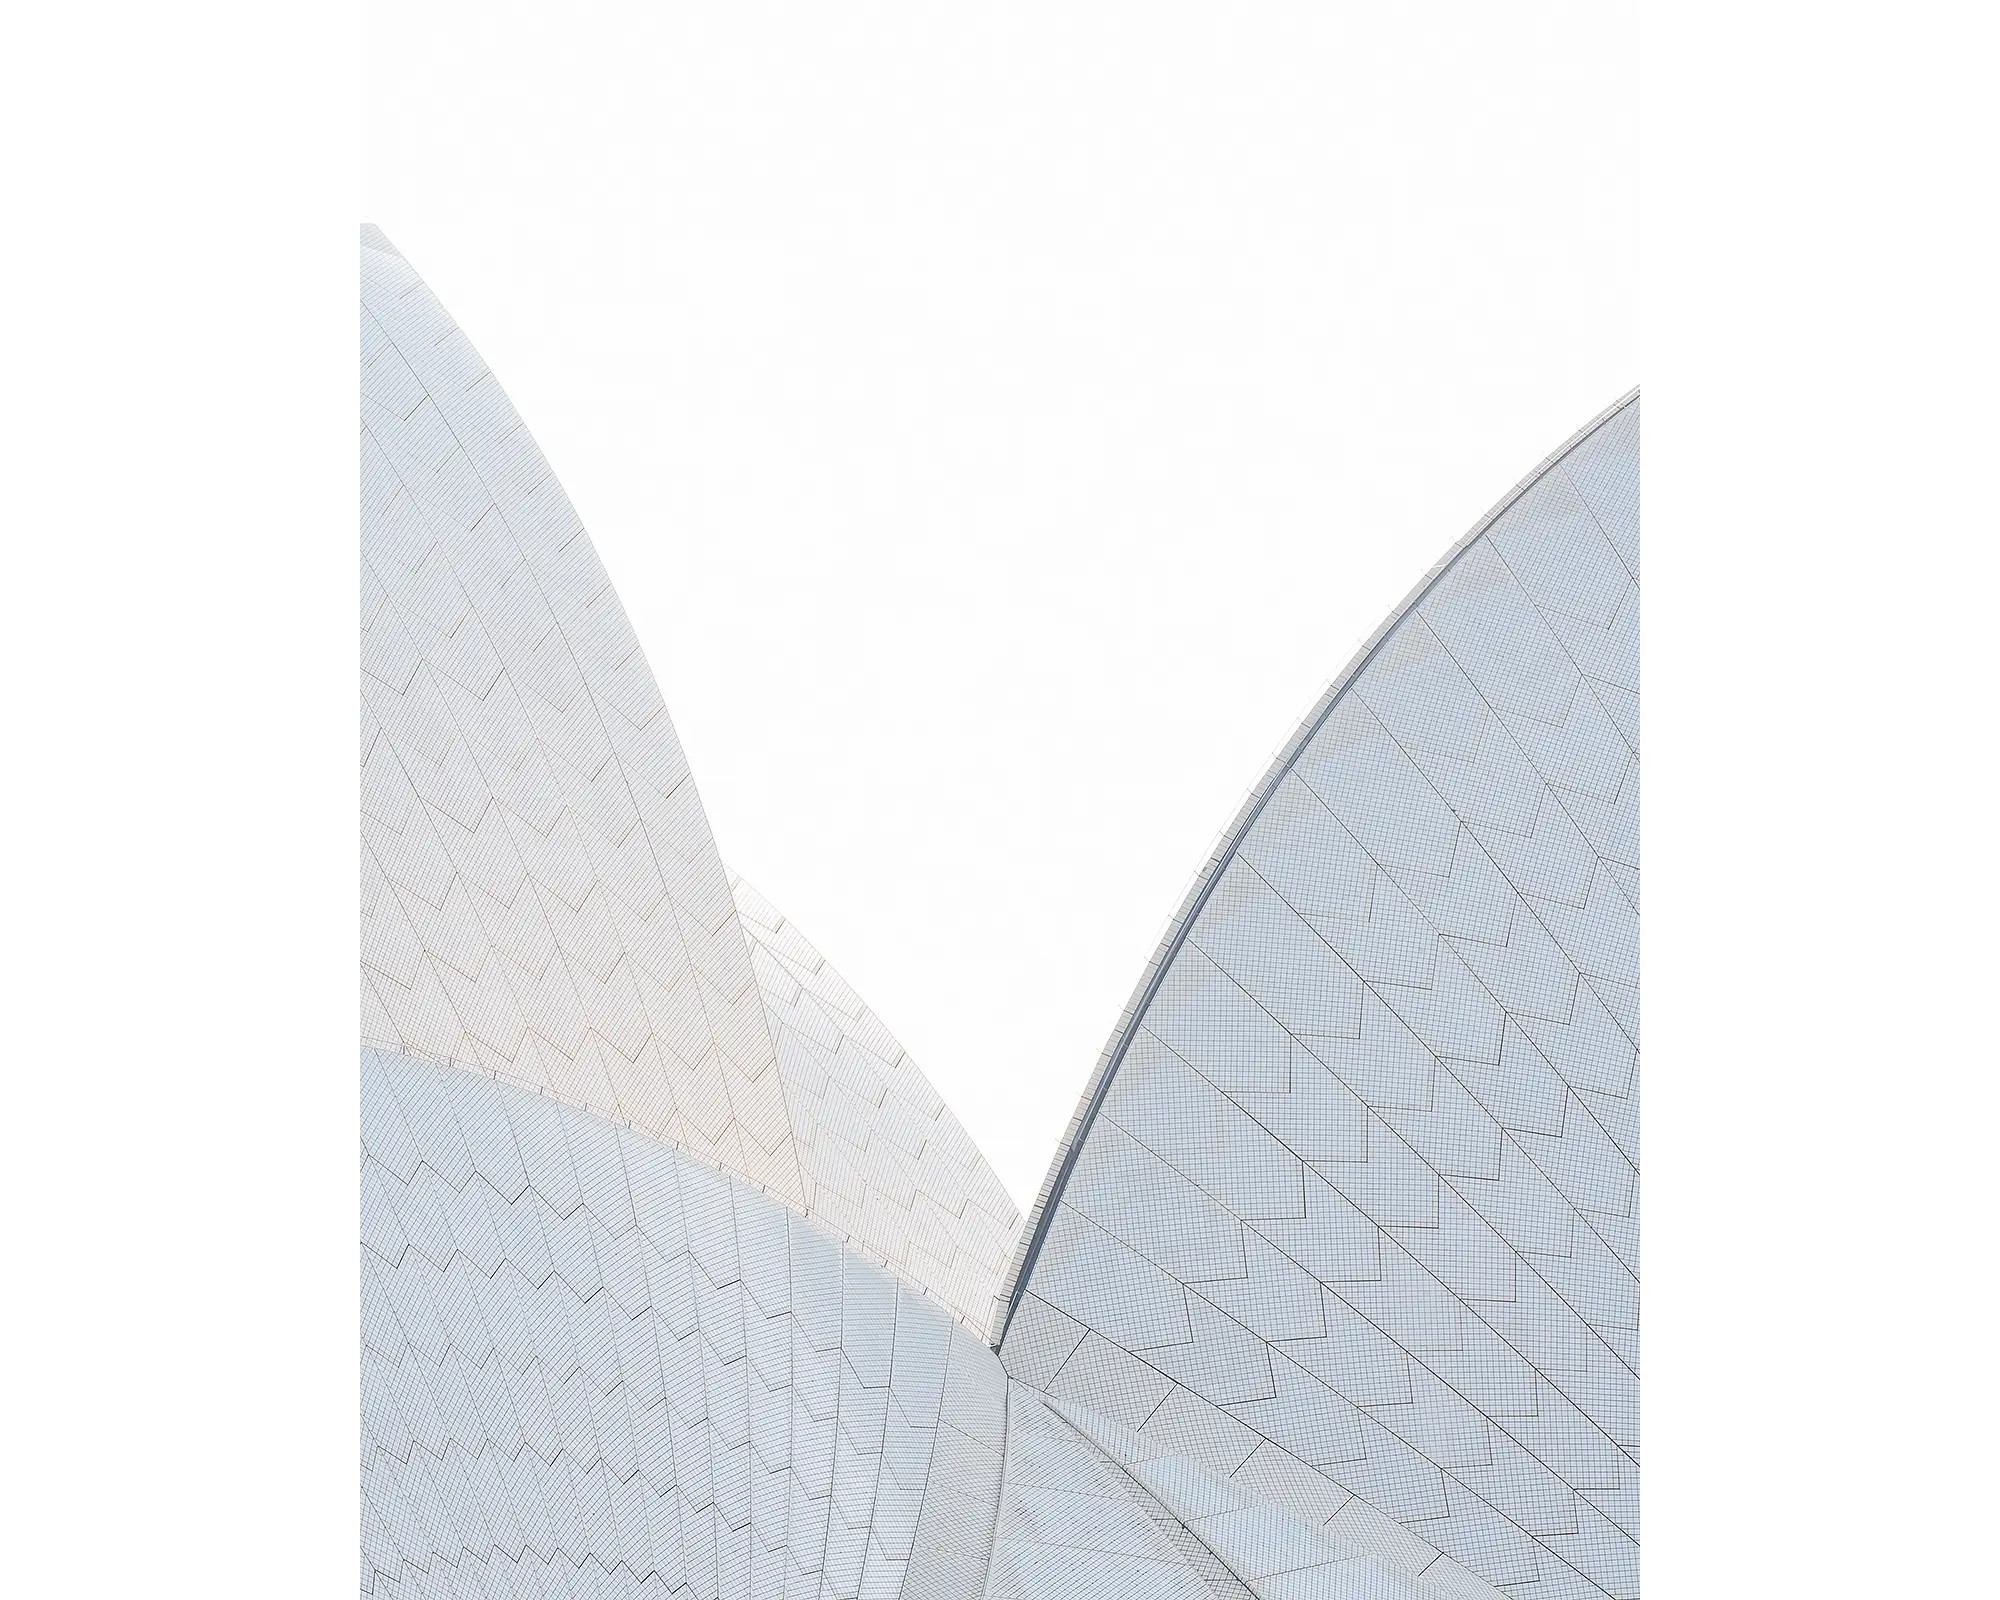 Abstract patterns of Sydney Opera House shells.